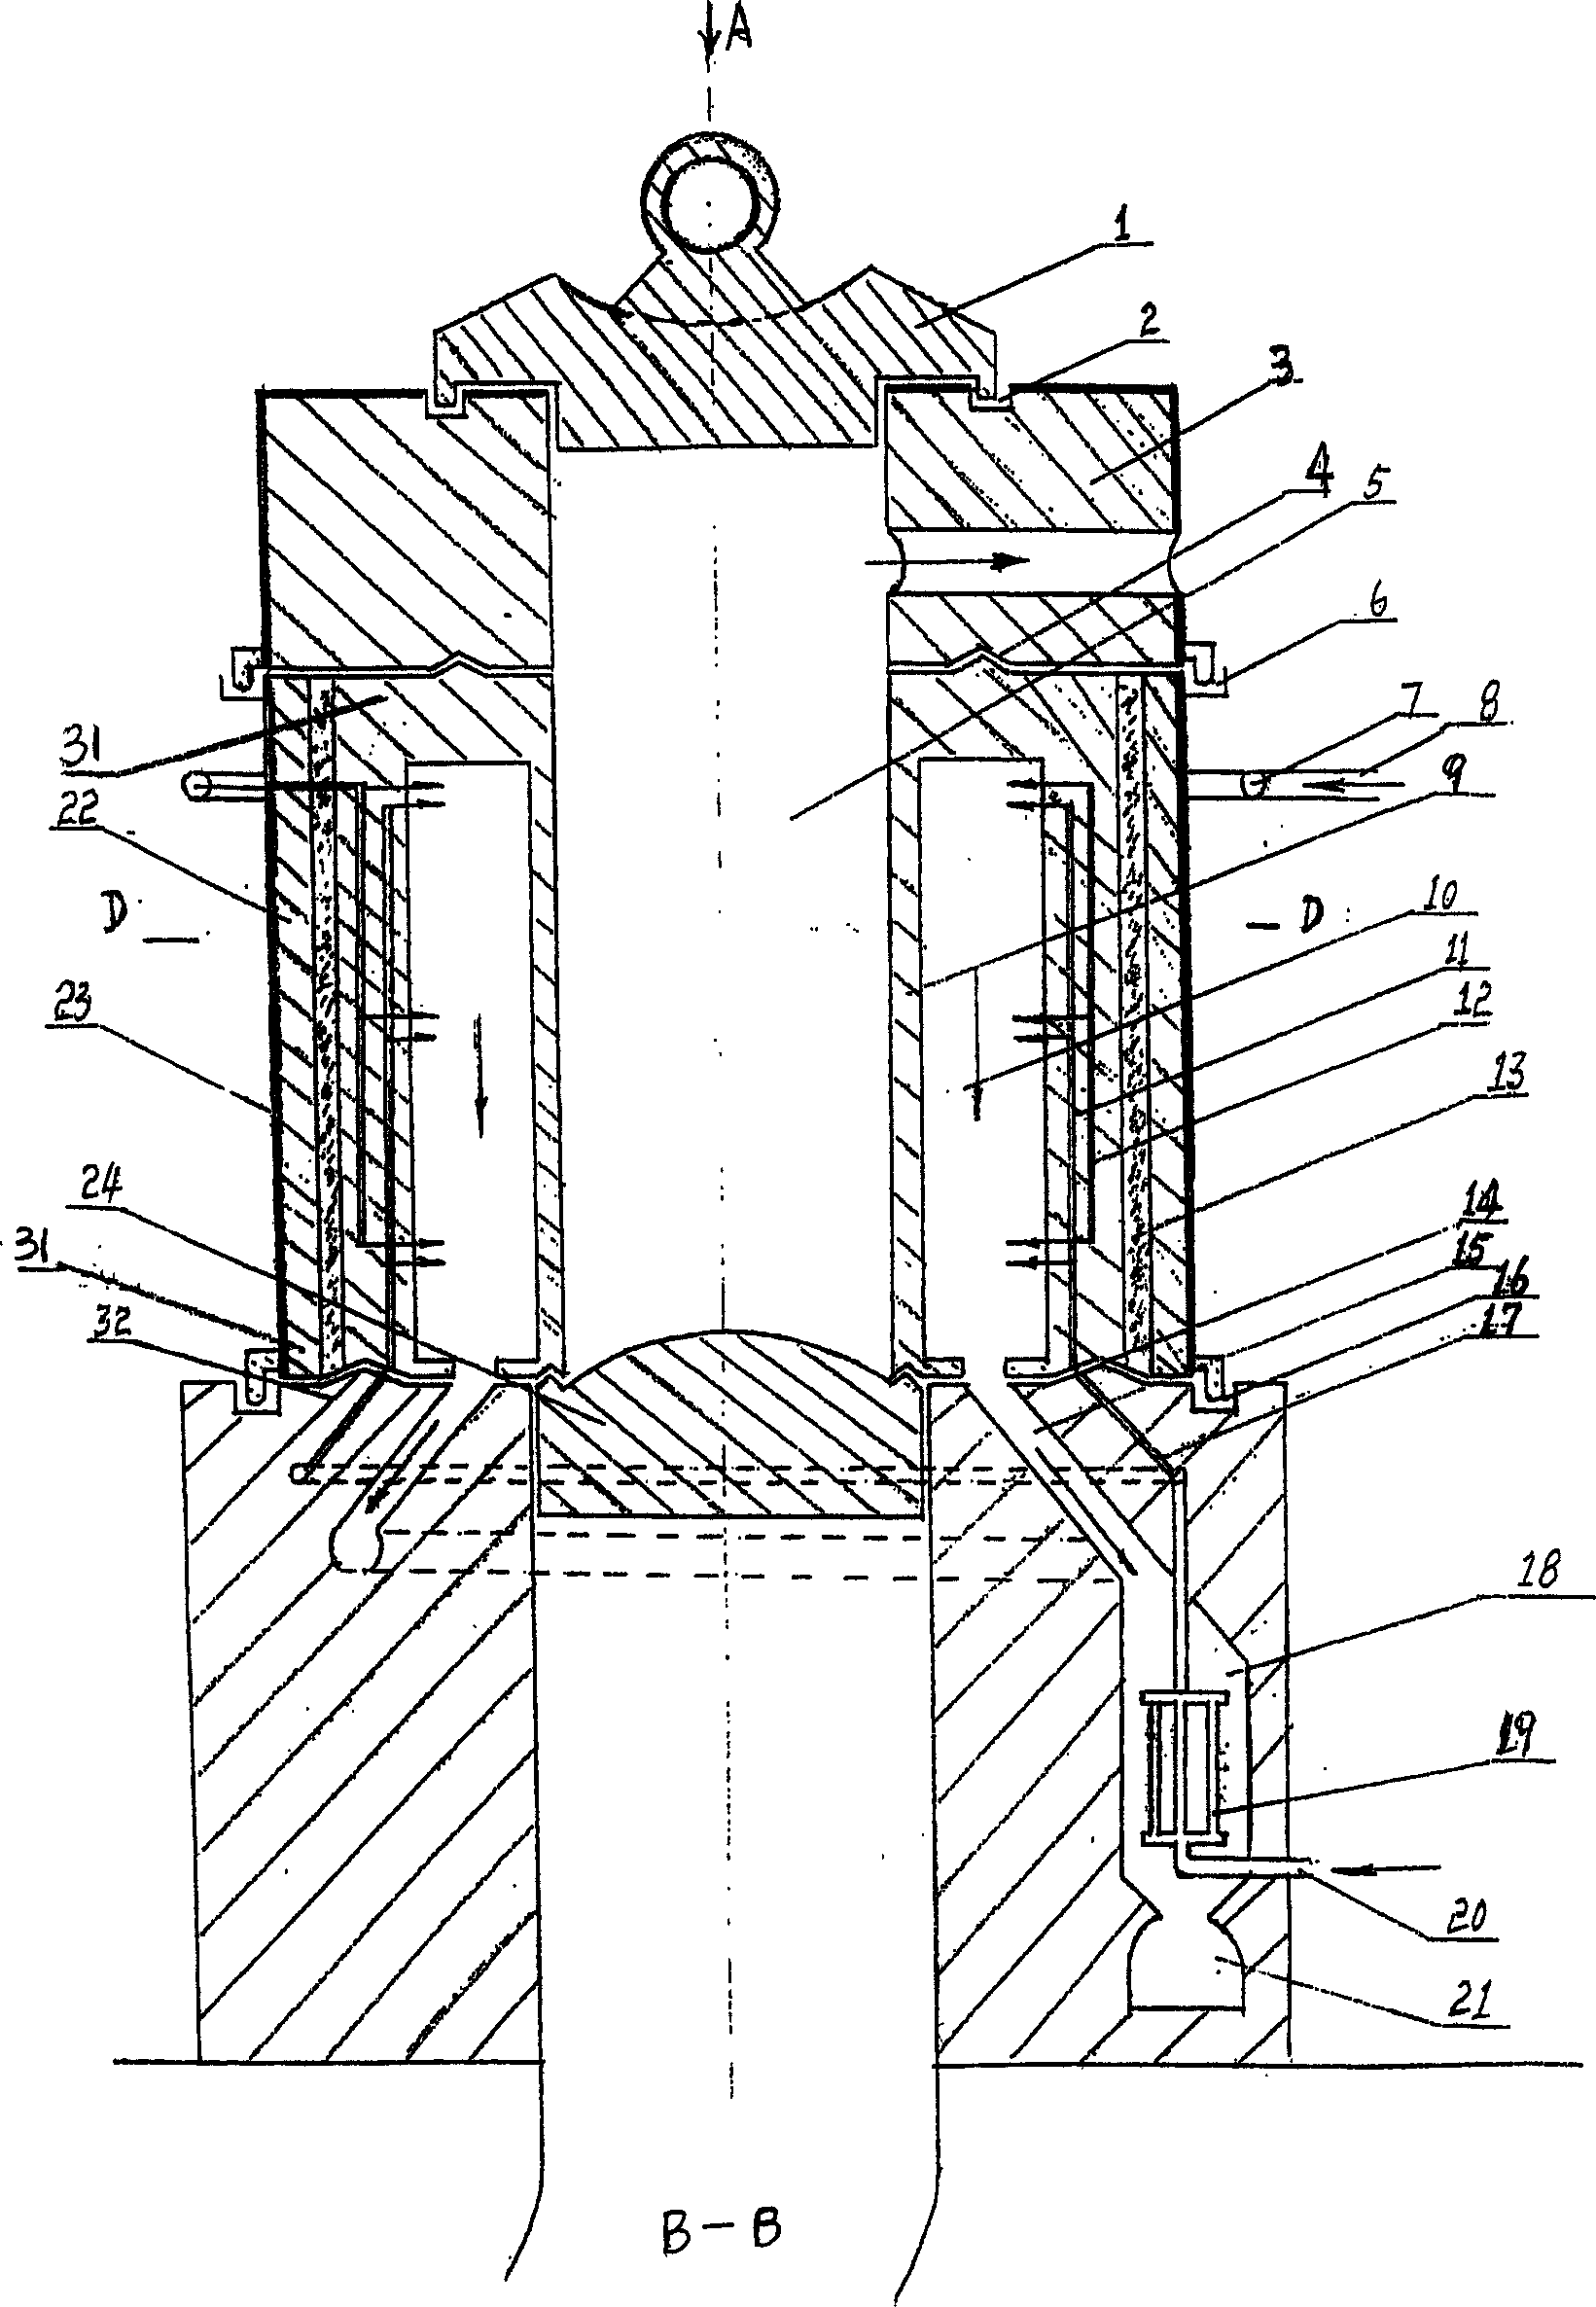 Vertical cylidndrical coke oven and submerging coke quenching method